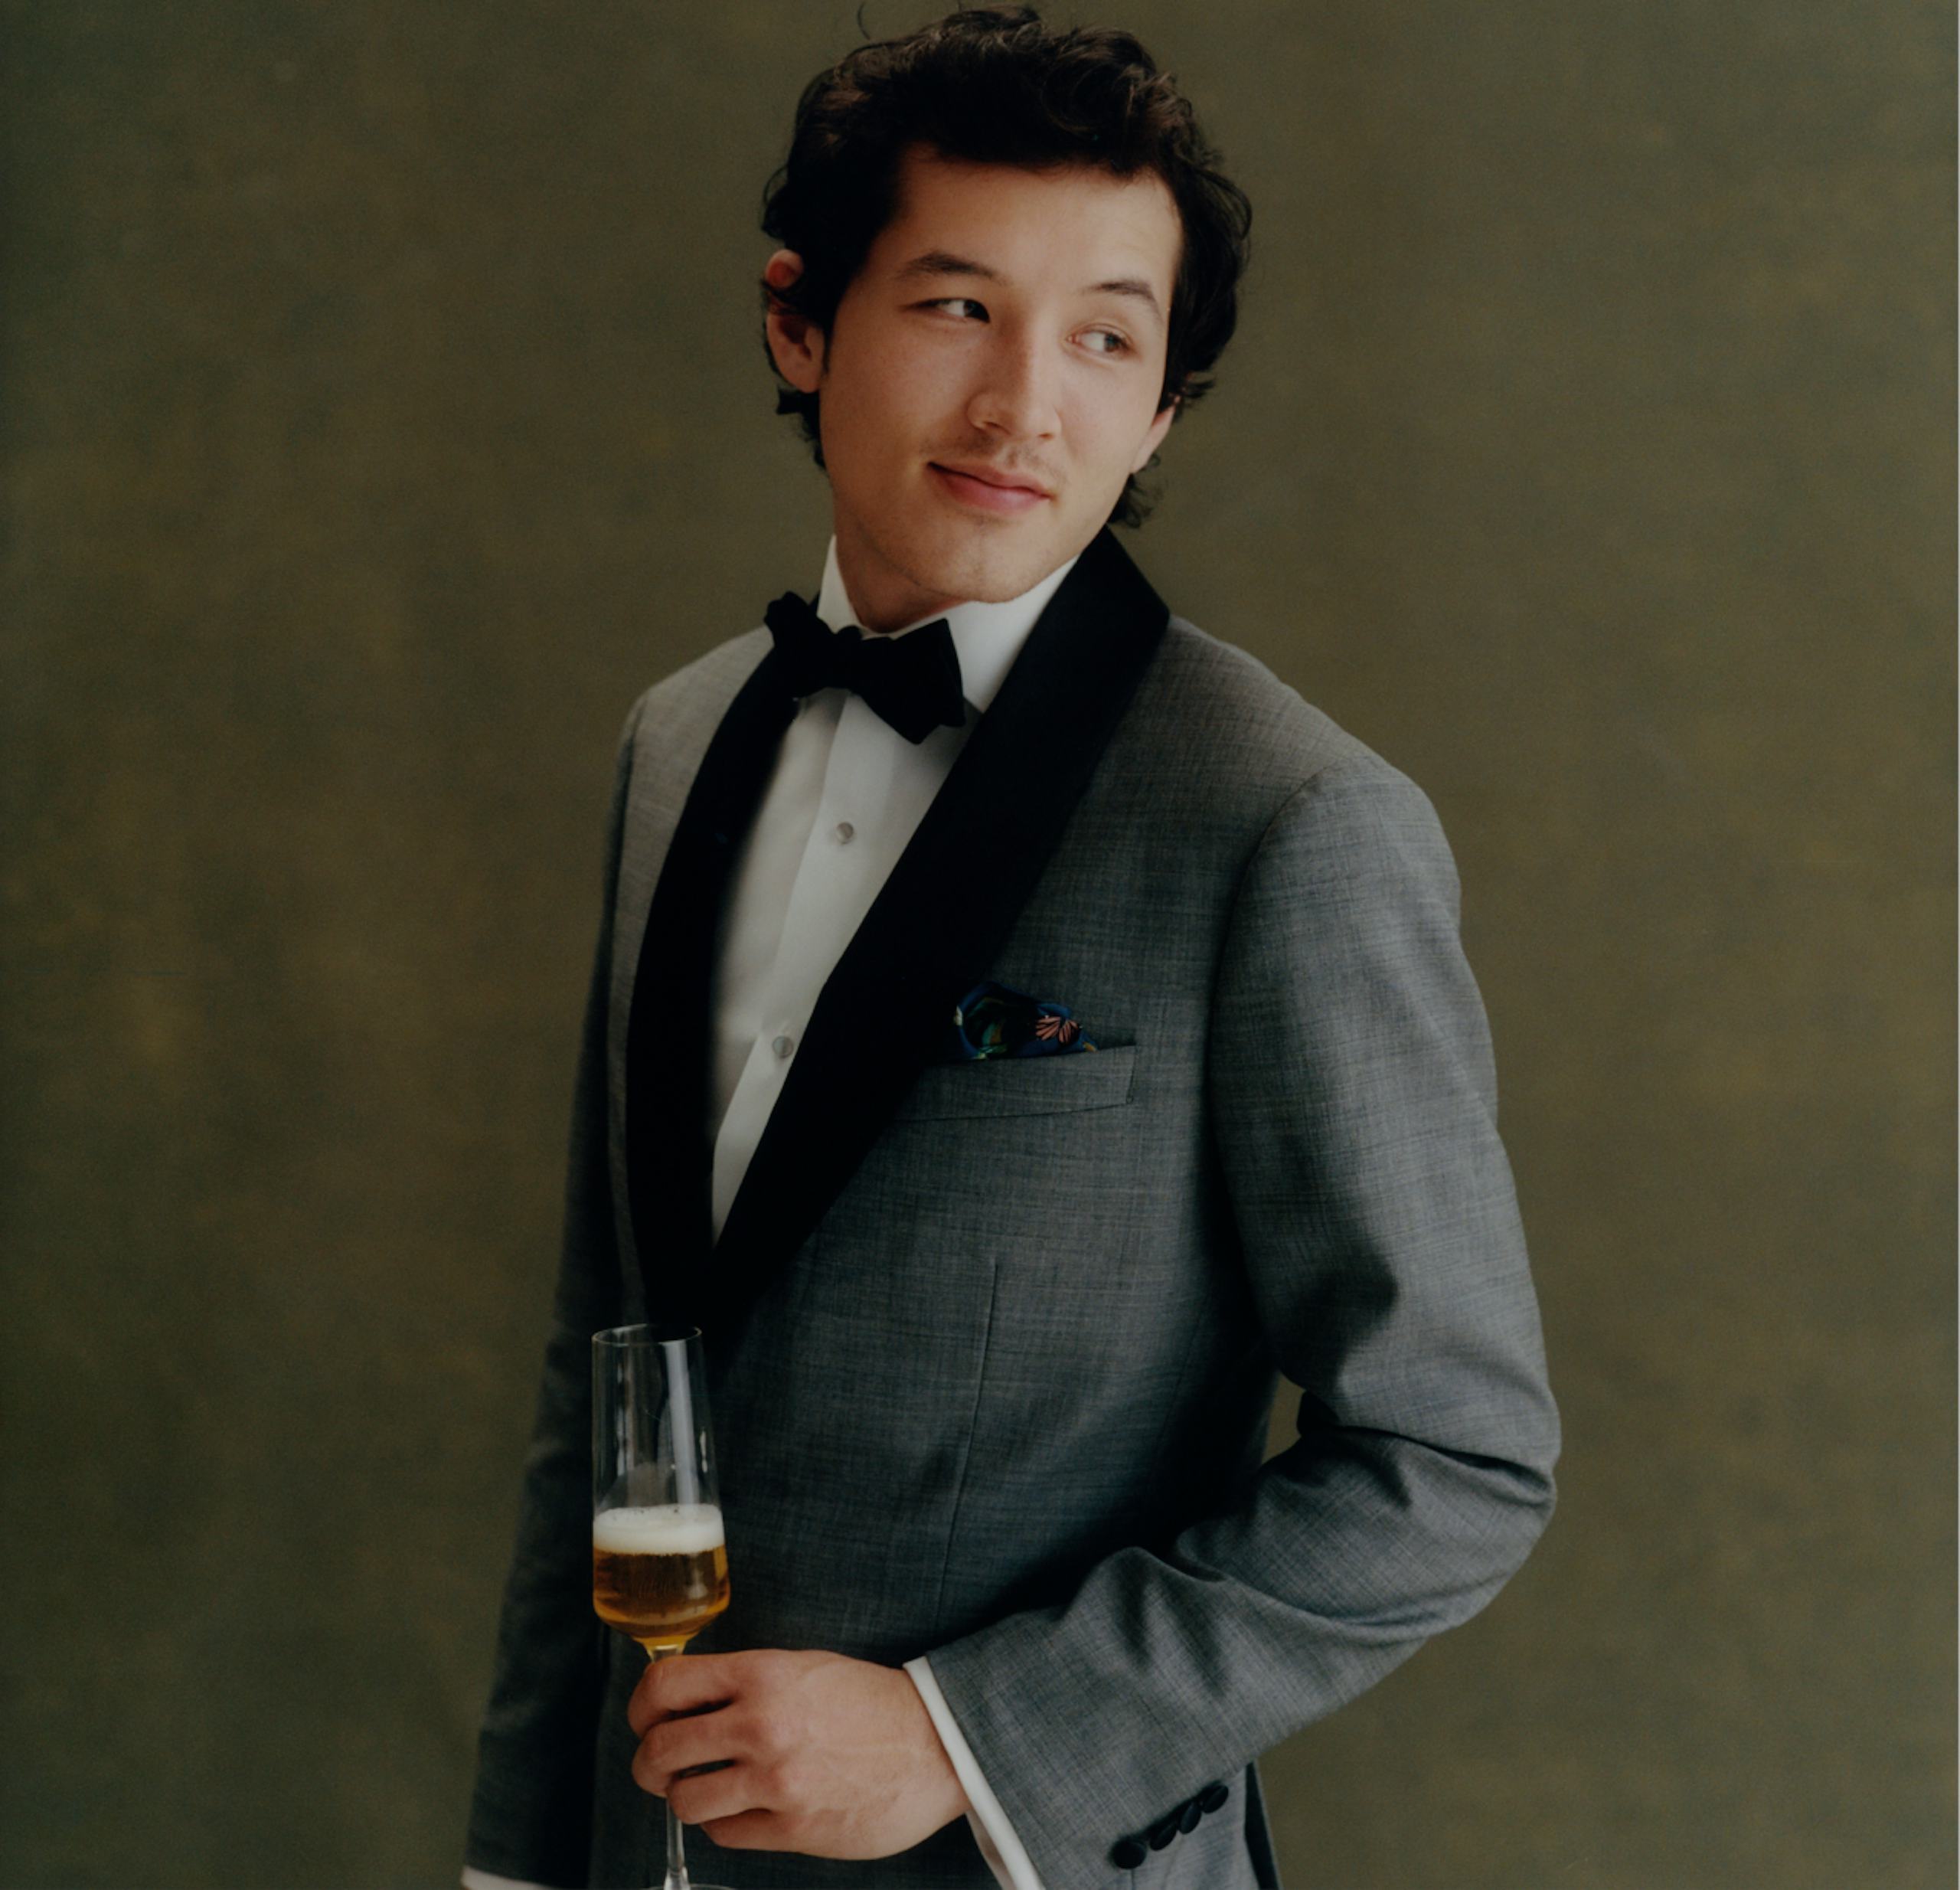 image of model wearing an empire tux and raising a champagne flute